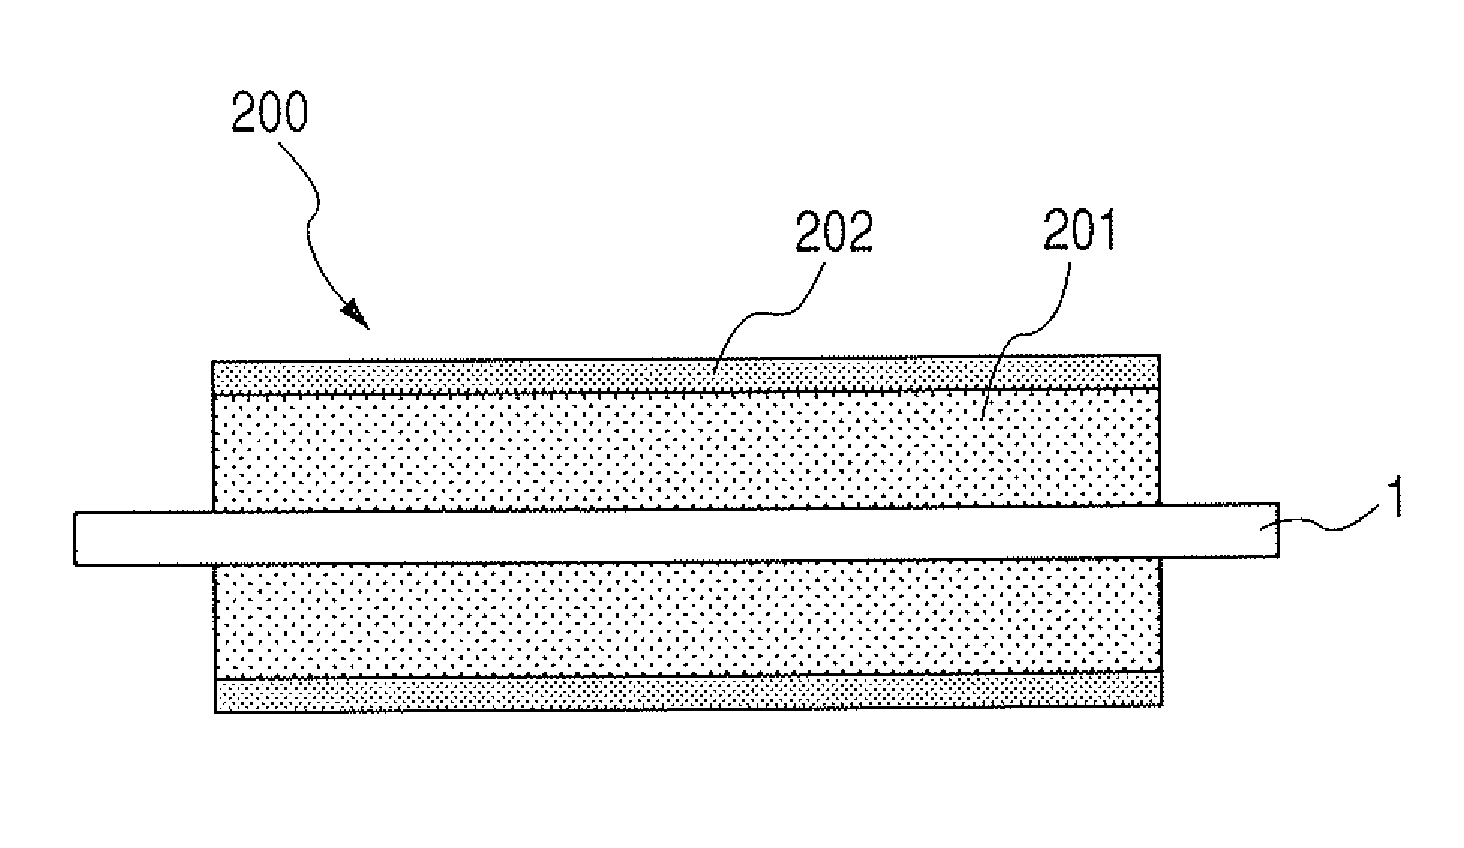 Developing member and electrophotographic image forming apparatus